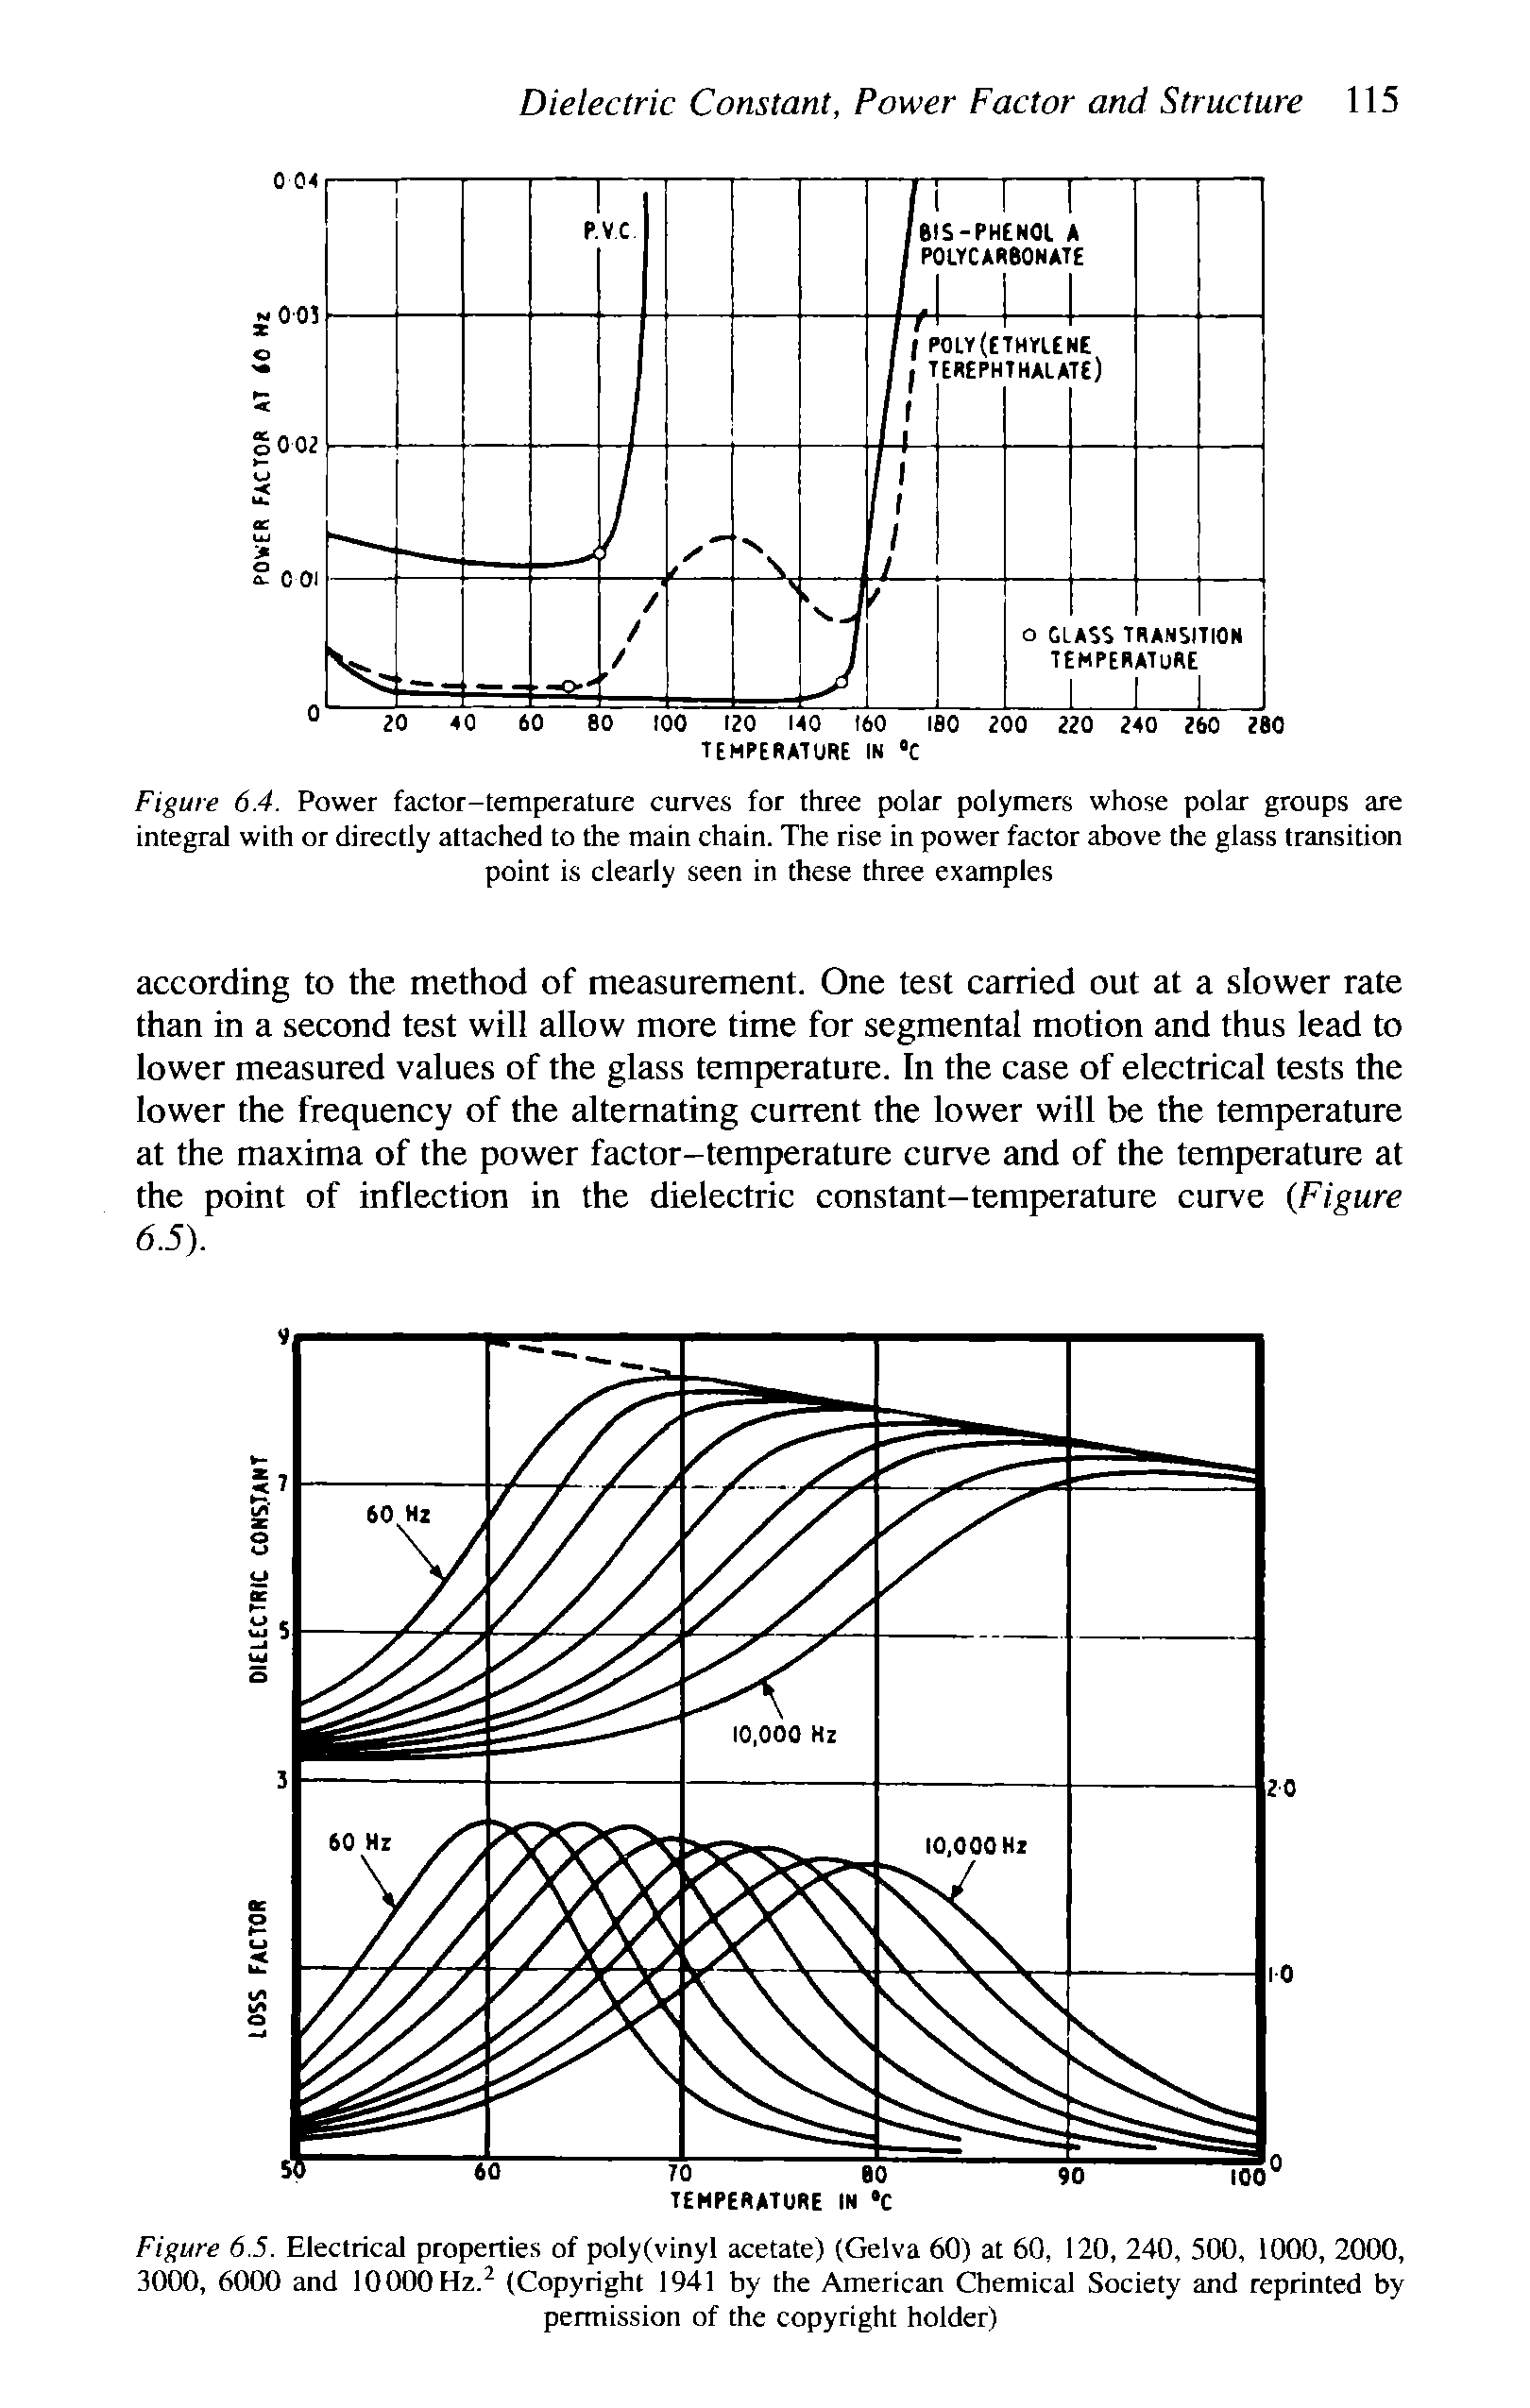 Figure 6.5. Electrical properties of poly(vinyl acetate) (Gelva 60) at 60, 120, 240, 500, 1000, 2000, 3000, 6000 and 10000Hz. (Copyright 1941 by the American Chemical Society and reprinted by permission of the copyright holder)...